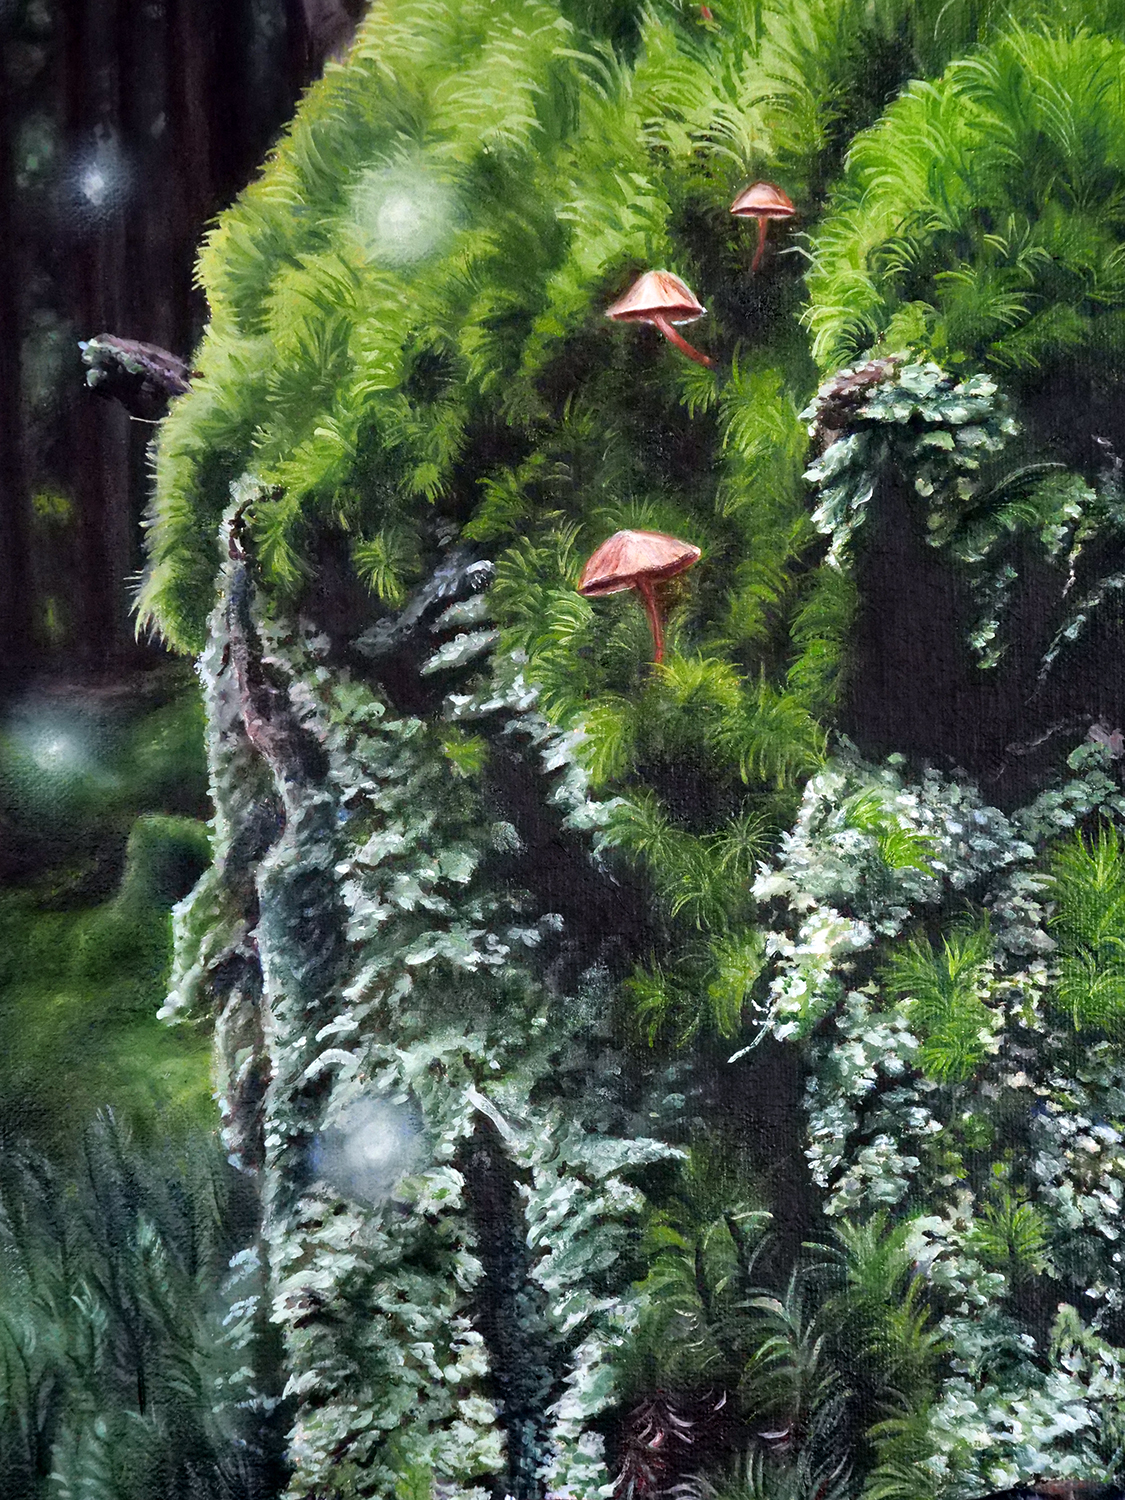 detail of the lichen and tiny mushrooms hidden realms painting